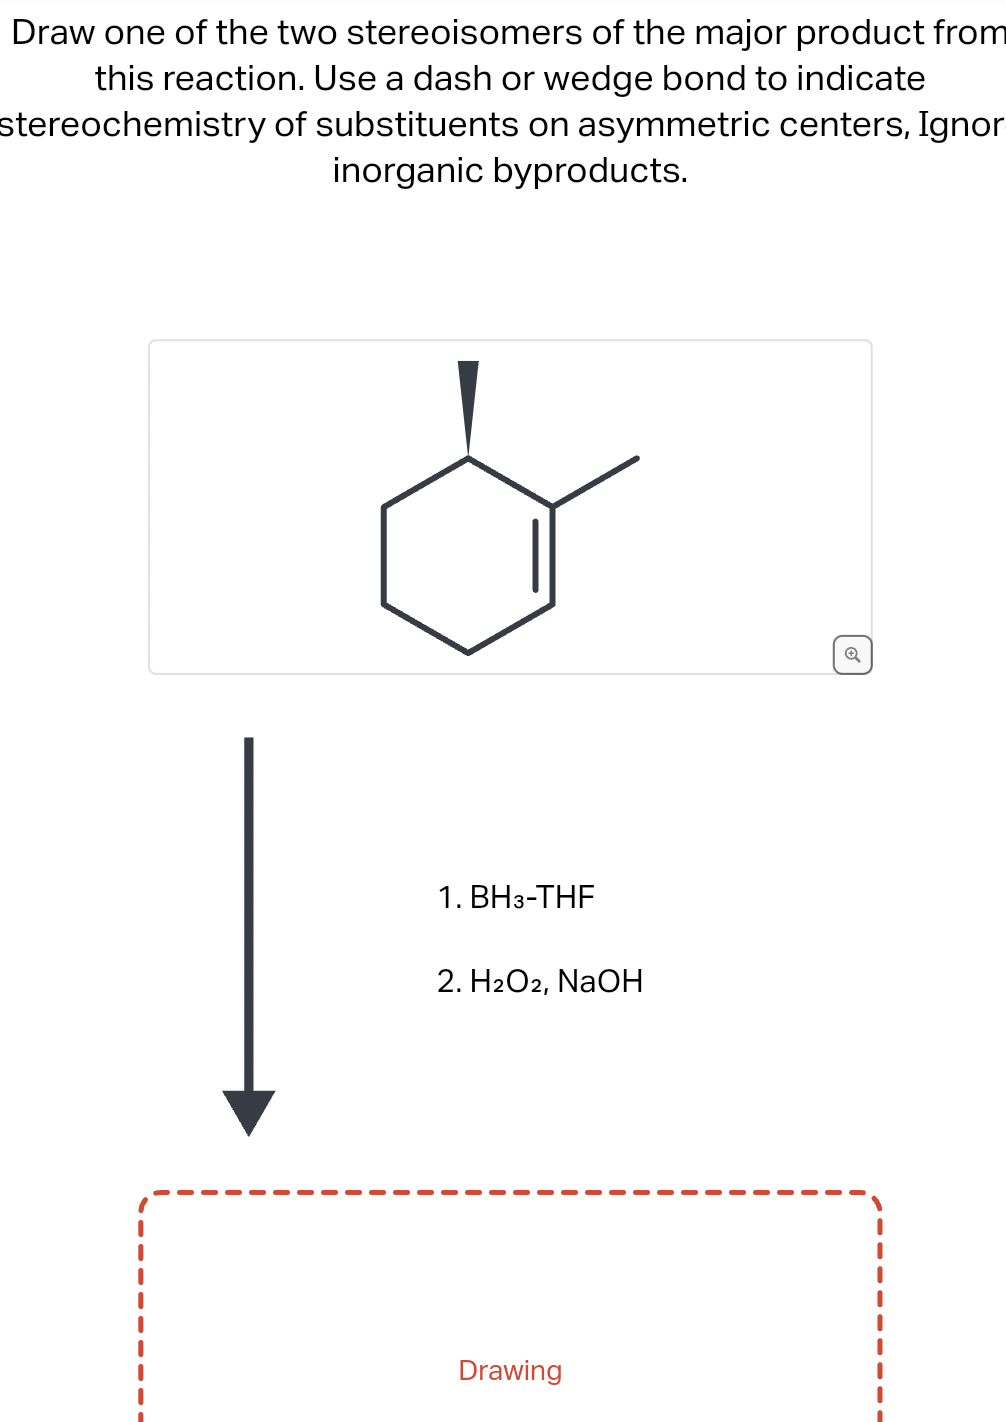 Draw one of the two stereoisomers of the major product from
this reaction. Use a dash or wedge bond to indicate
stereochemistry
of substituents on asymmetric centers, Ignor
inorganic byproducts.
1. BH3-THF
2. H₂O2, NaOH
Drawing